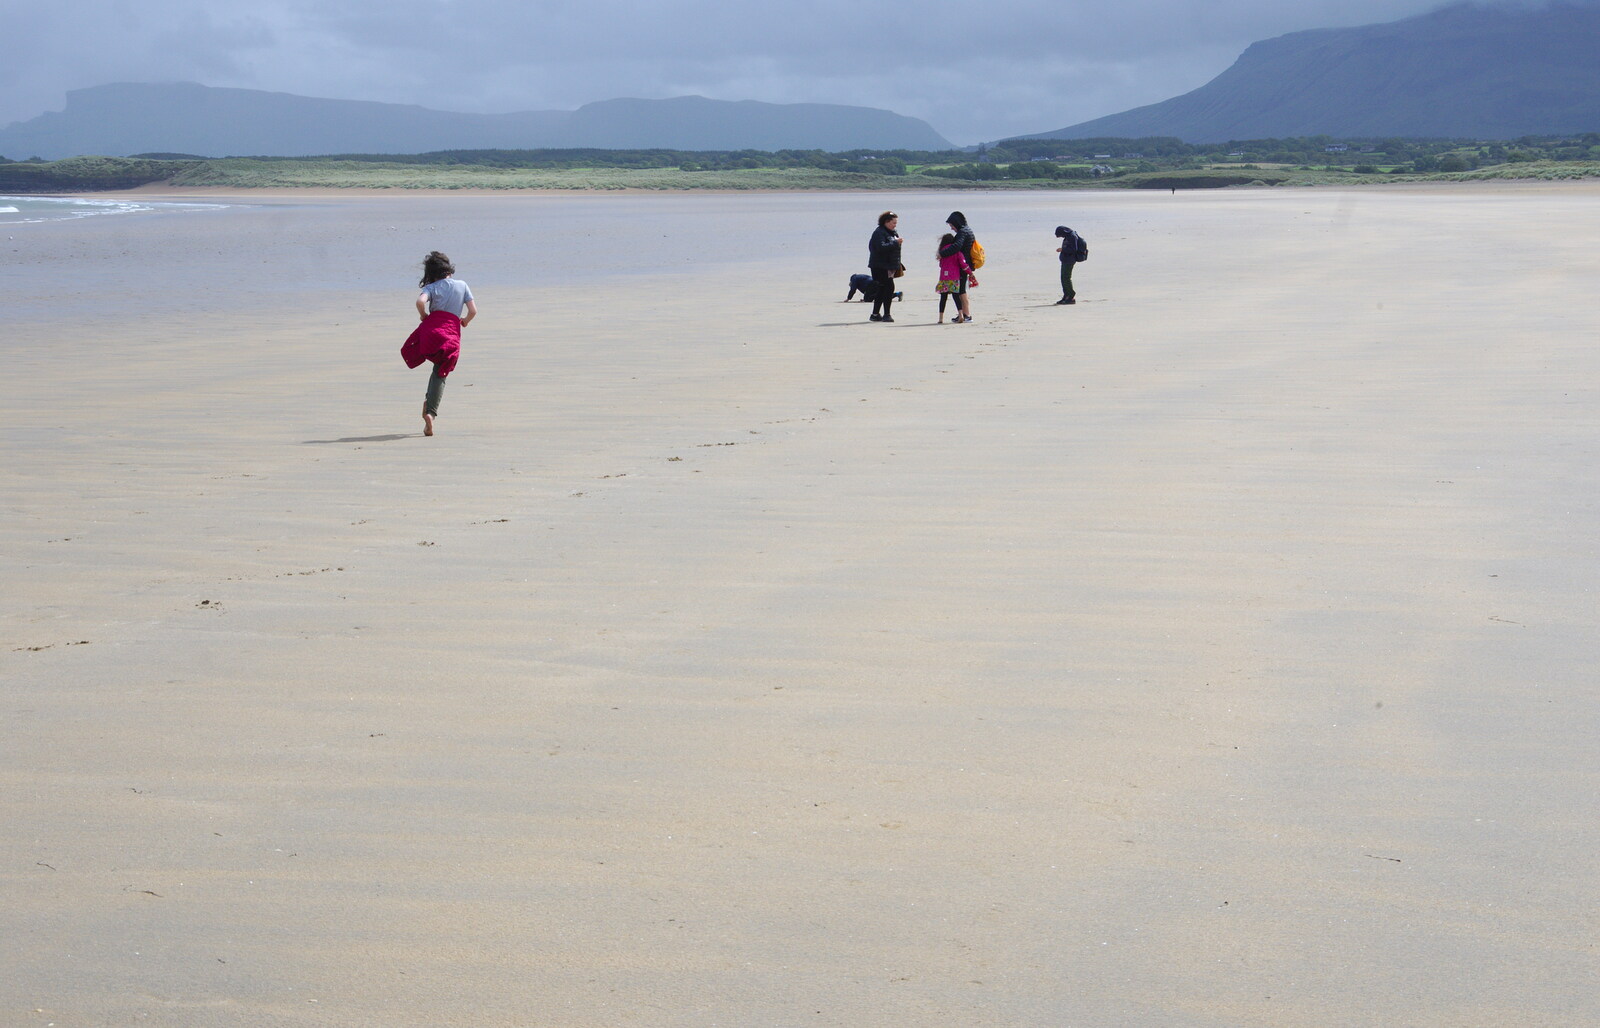 Fern races to catch up from Mullaghmore Beach and Marble Arch Caves, Sligo and Fermanagh, Ireland - 19th August 2019